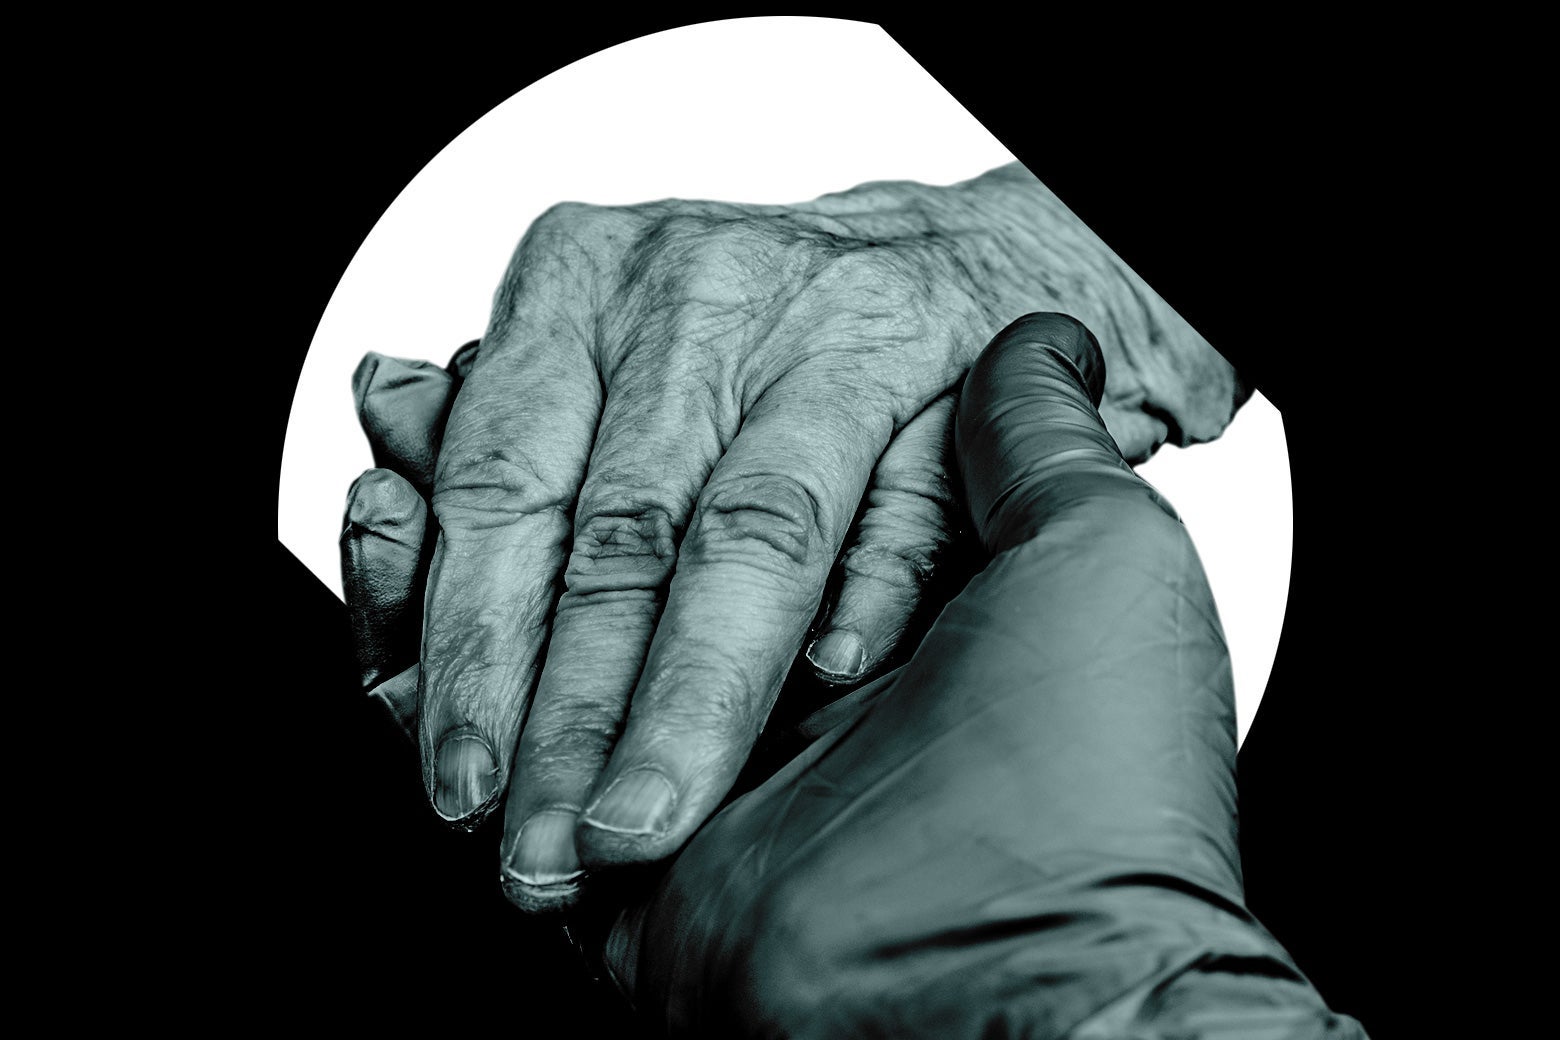 A gloved hand holding an older patient's hand